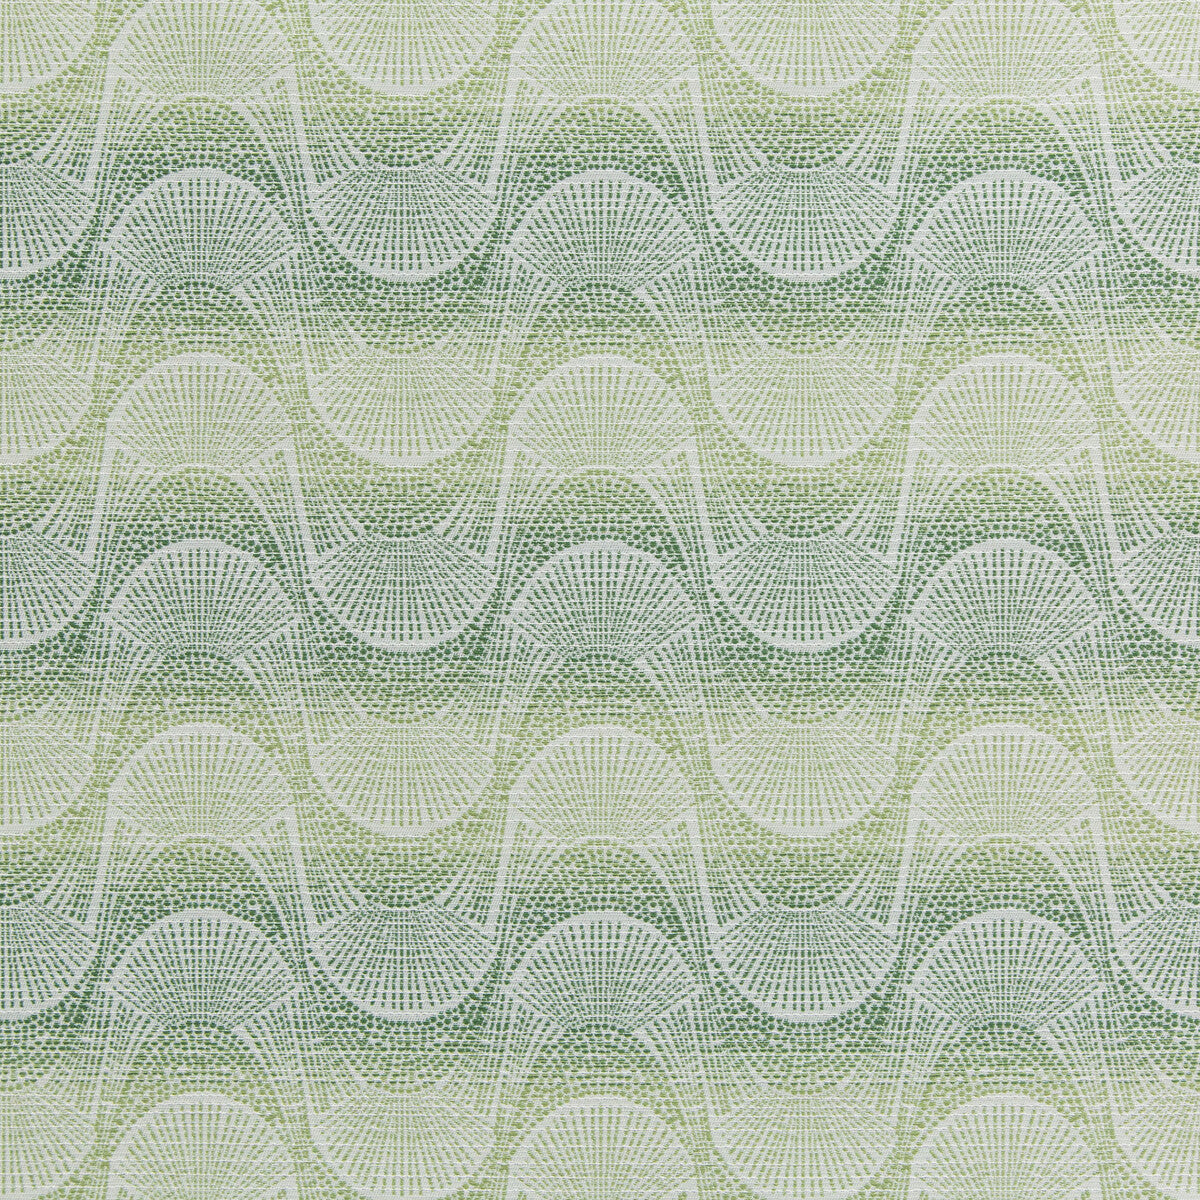 Tofino fabric in clover color - pattern 35835.3.0 - by Kravet Design in the Indoor / Outdoor collection